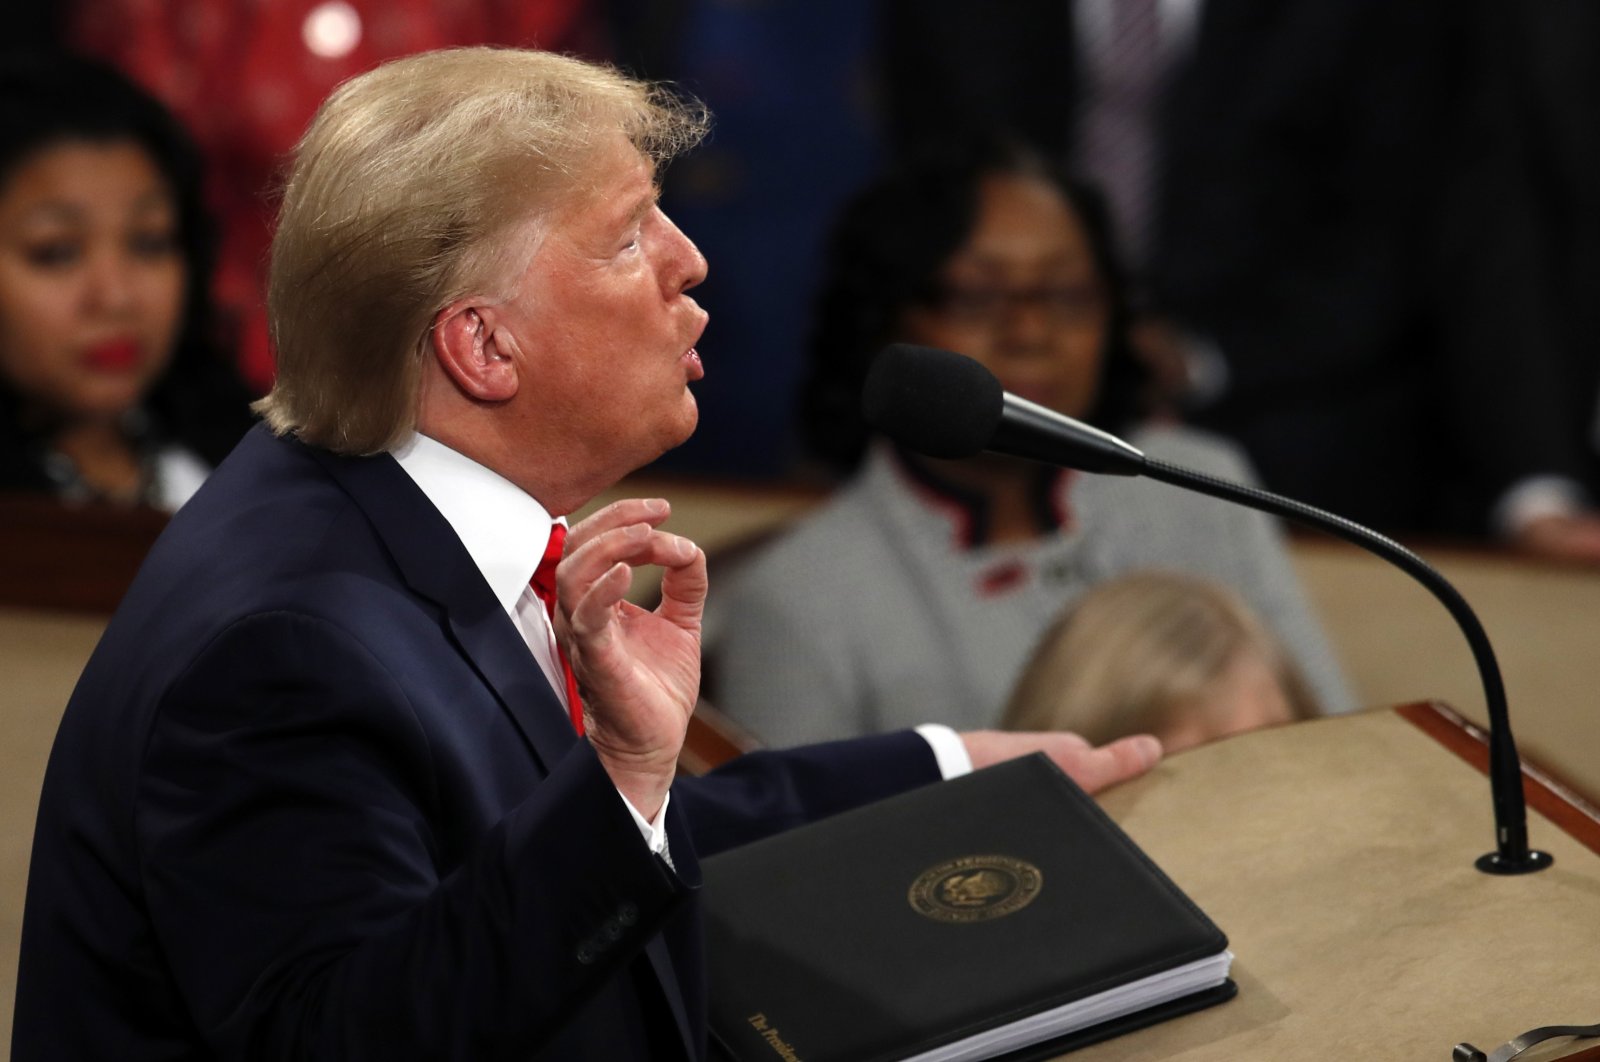 Former U.S. President Donald Trump delivers his State of the Union address to a joint session of Congress on Capitol Hill in Washington, D.C., U.S., Feb. 4, 2020. (AP Photo)